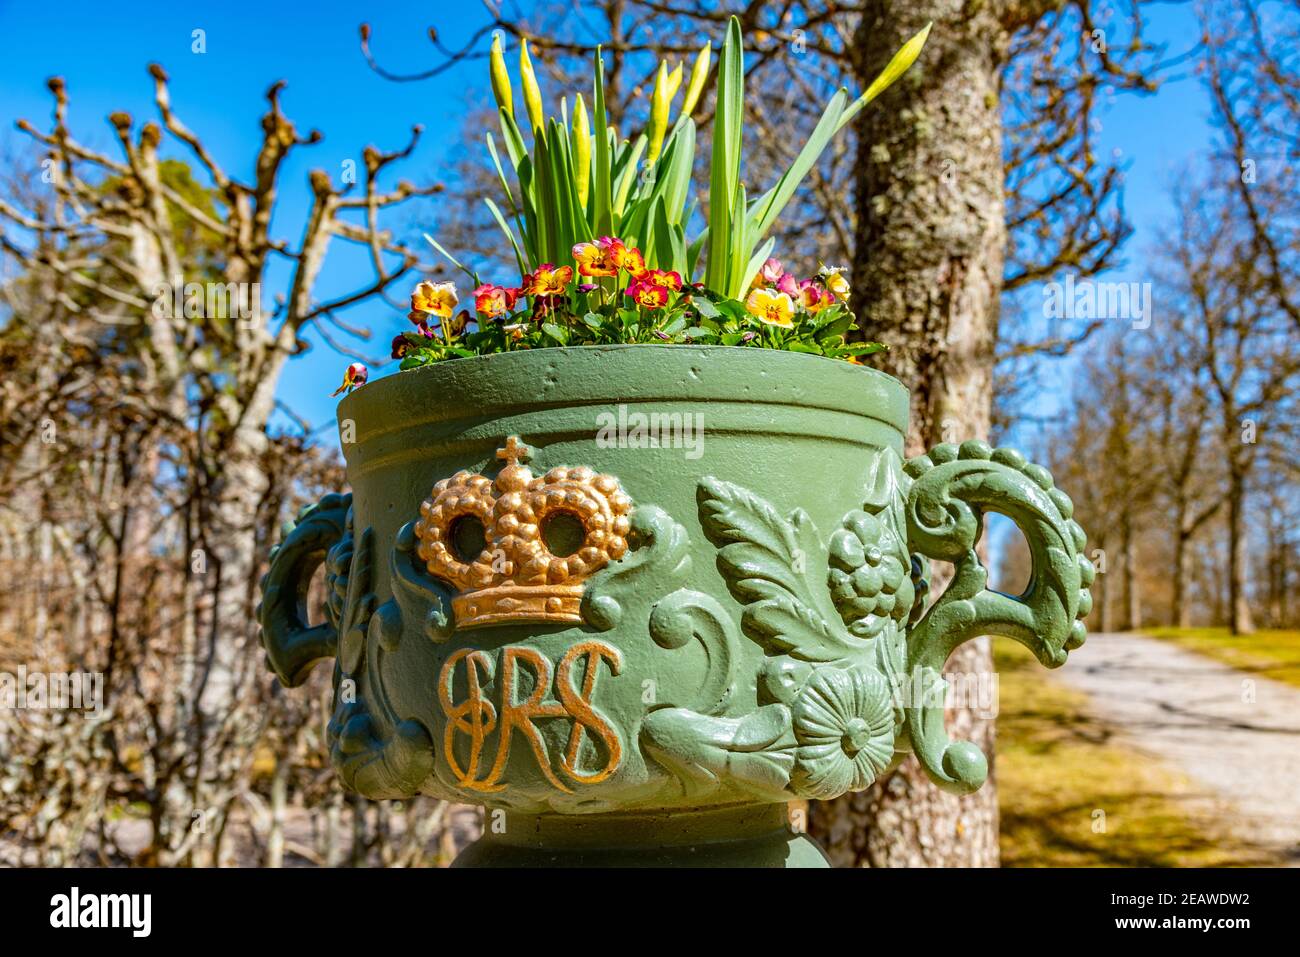 Royal flower pot in the Drottningholm Palace in Sweden Stock Photo